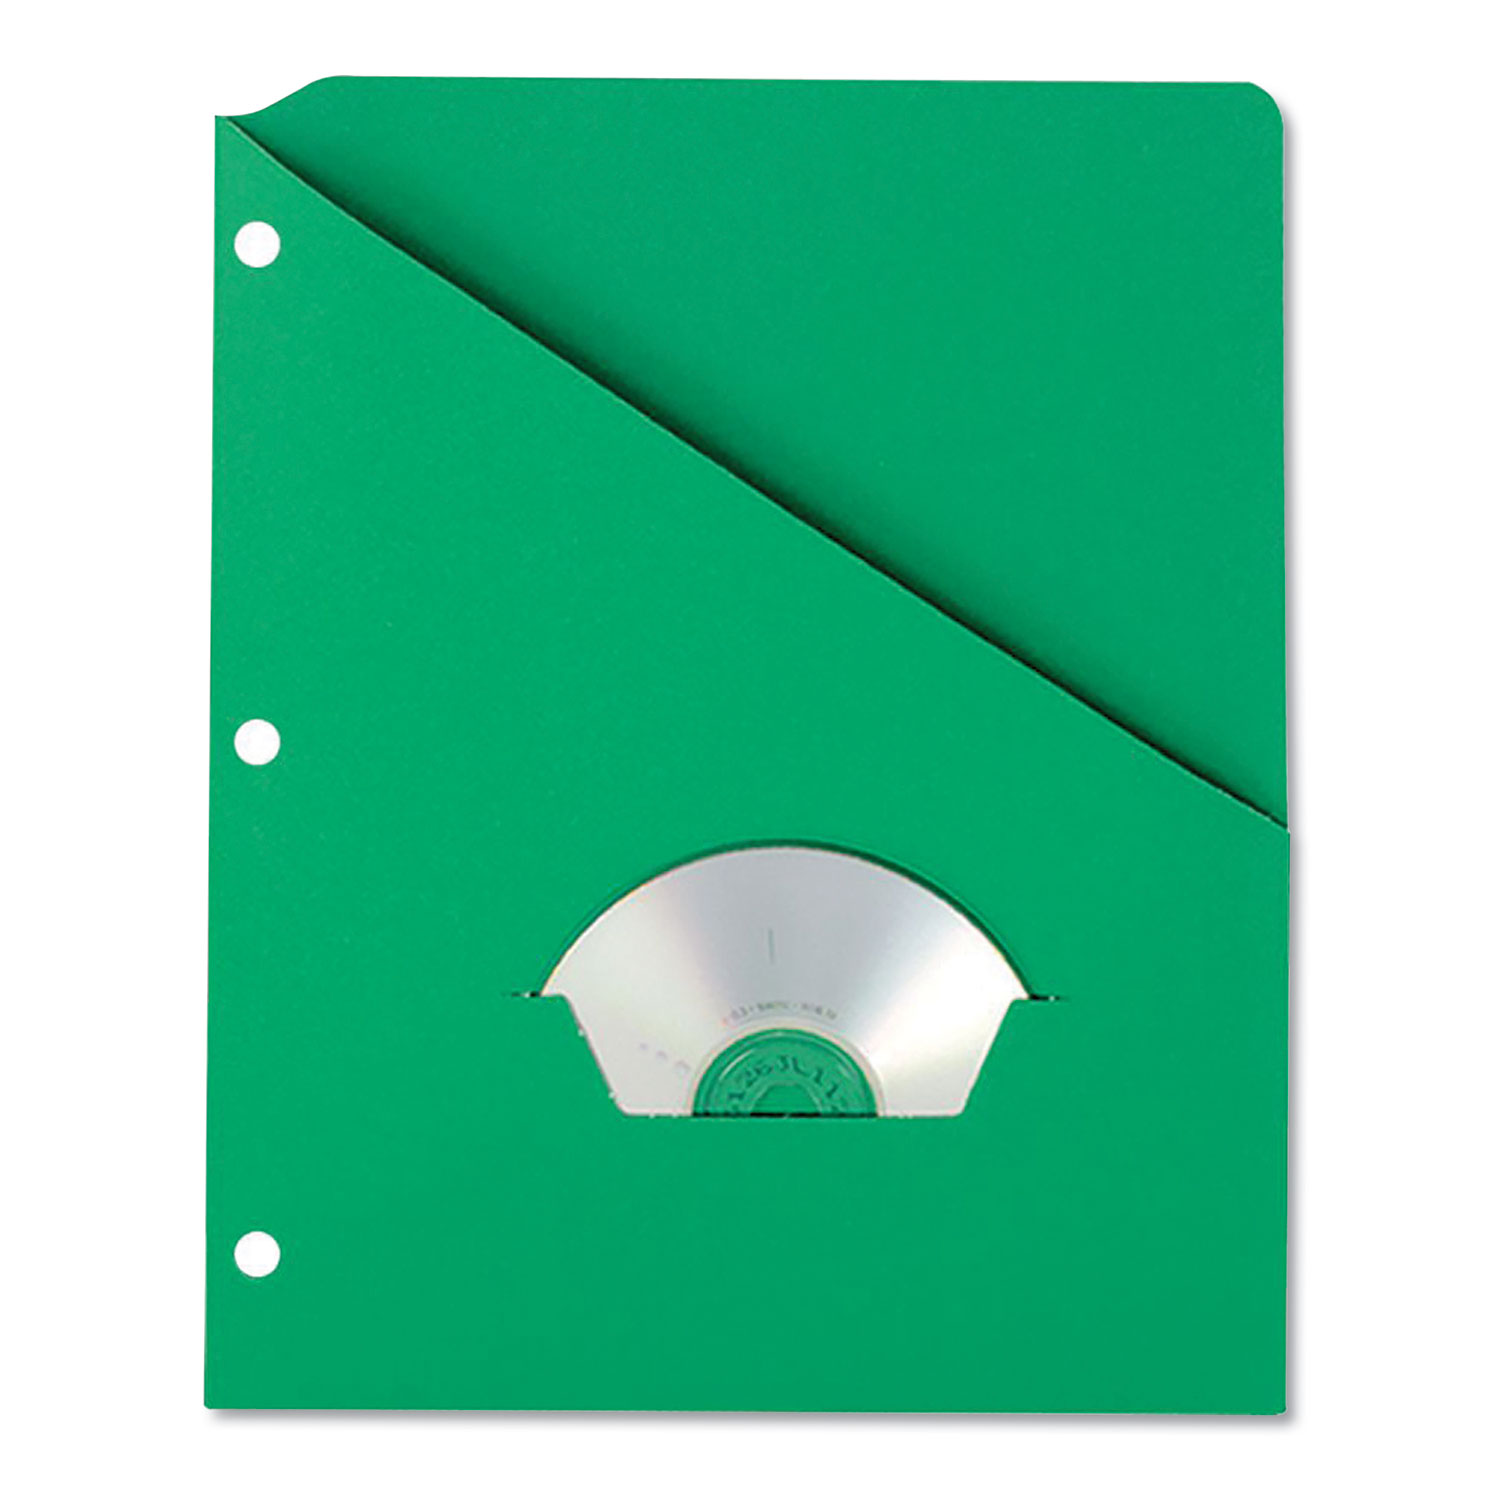  Pendaflex 32925 Slash Pocket Project Folders, 3-Hole Punched, Straight Tab, Letter Size, Green, 25/Pack (PFX32925) 